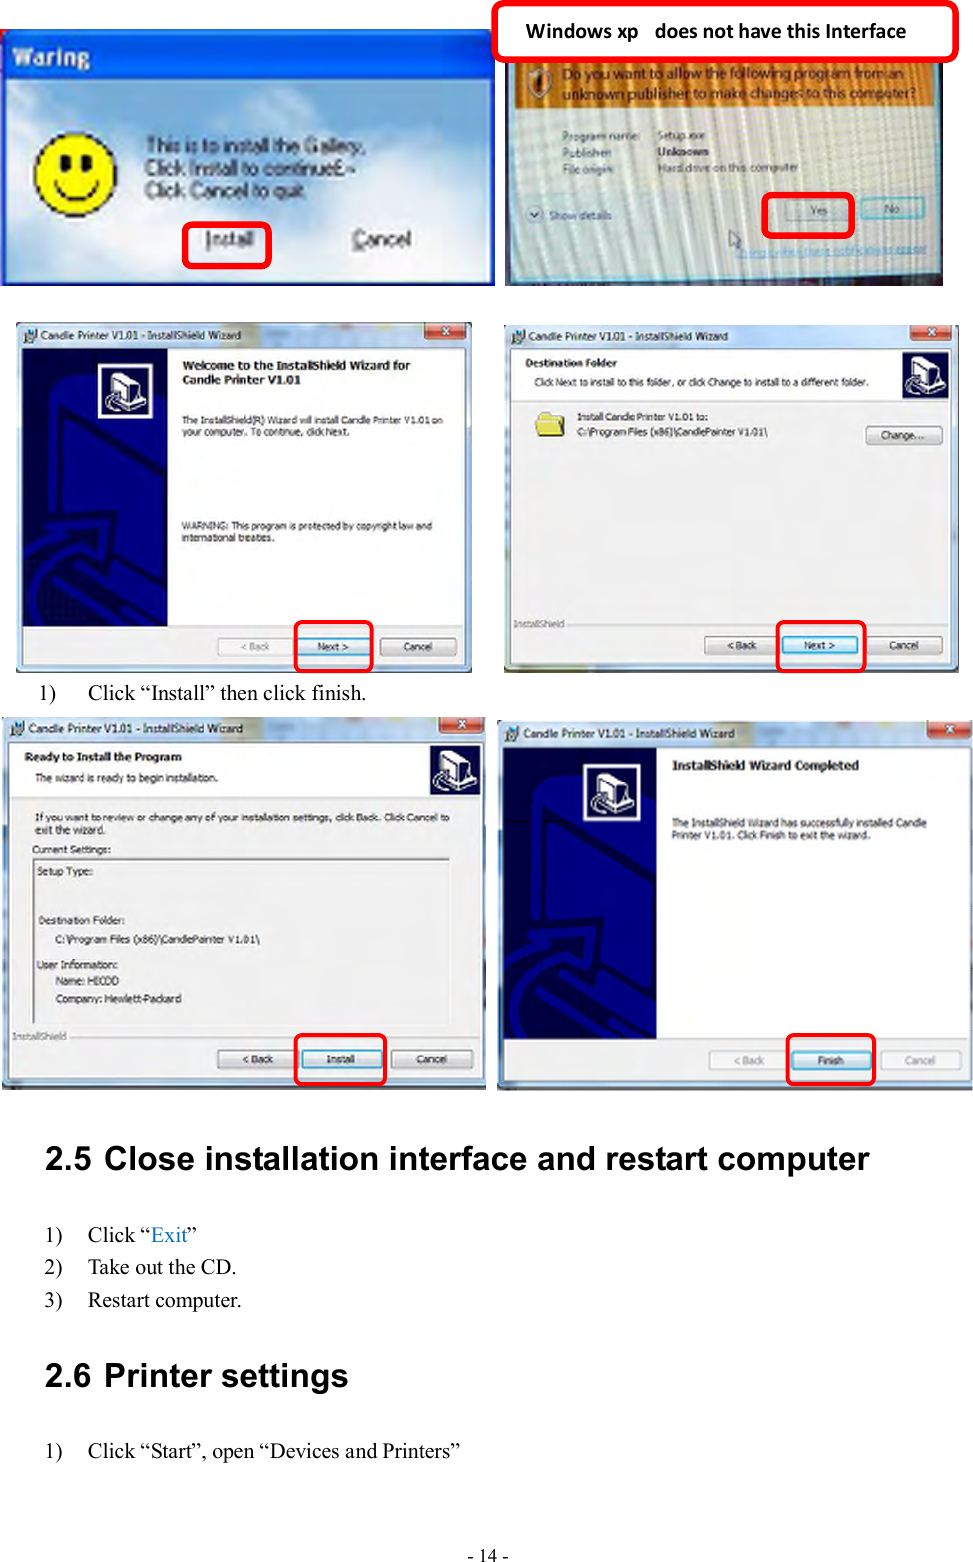  - 14 -            1) Click “Install” then click finish.    2.5 Close installation interface and restart computer 1) Click “Exit” 2) Take out the CD. 3) Restart computer. 2.6 Printer settings 1) Click “Start”, open “Devices and Printers”  Windows xp   does not have this Interface 